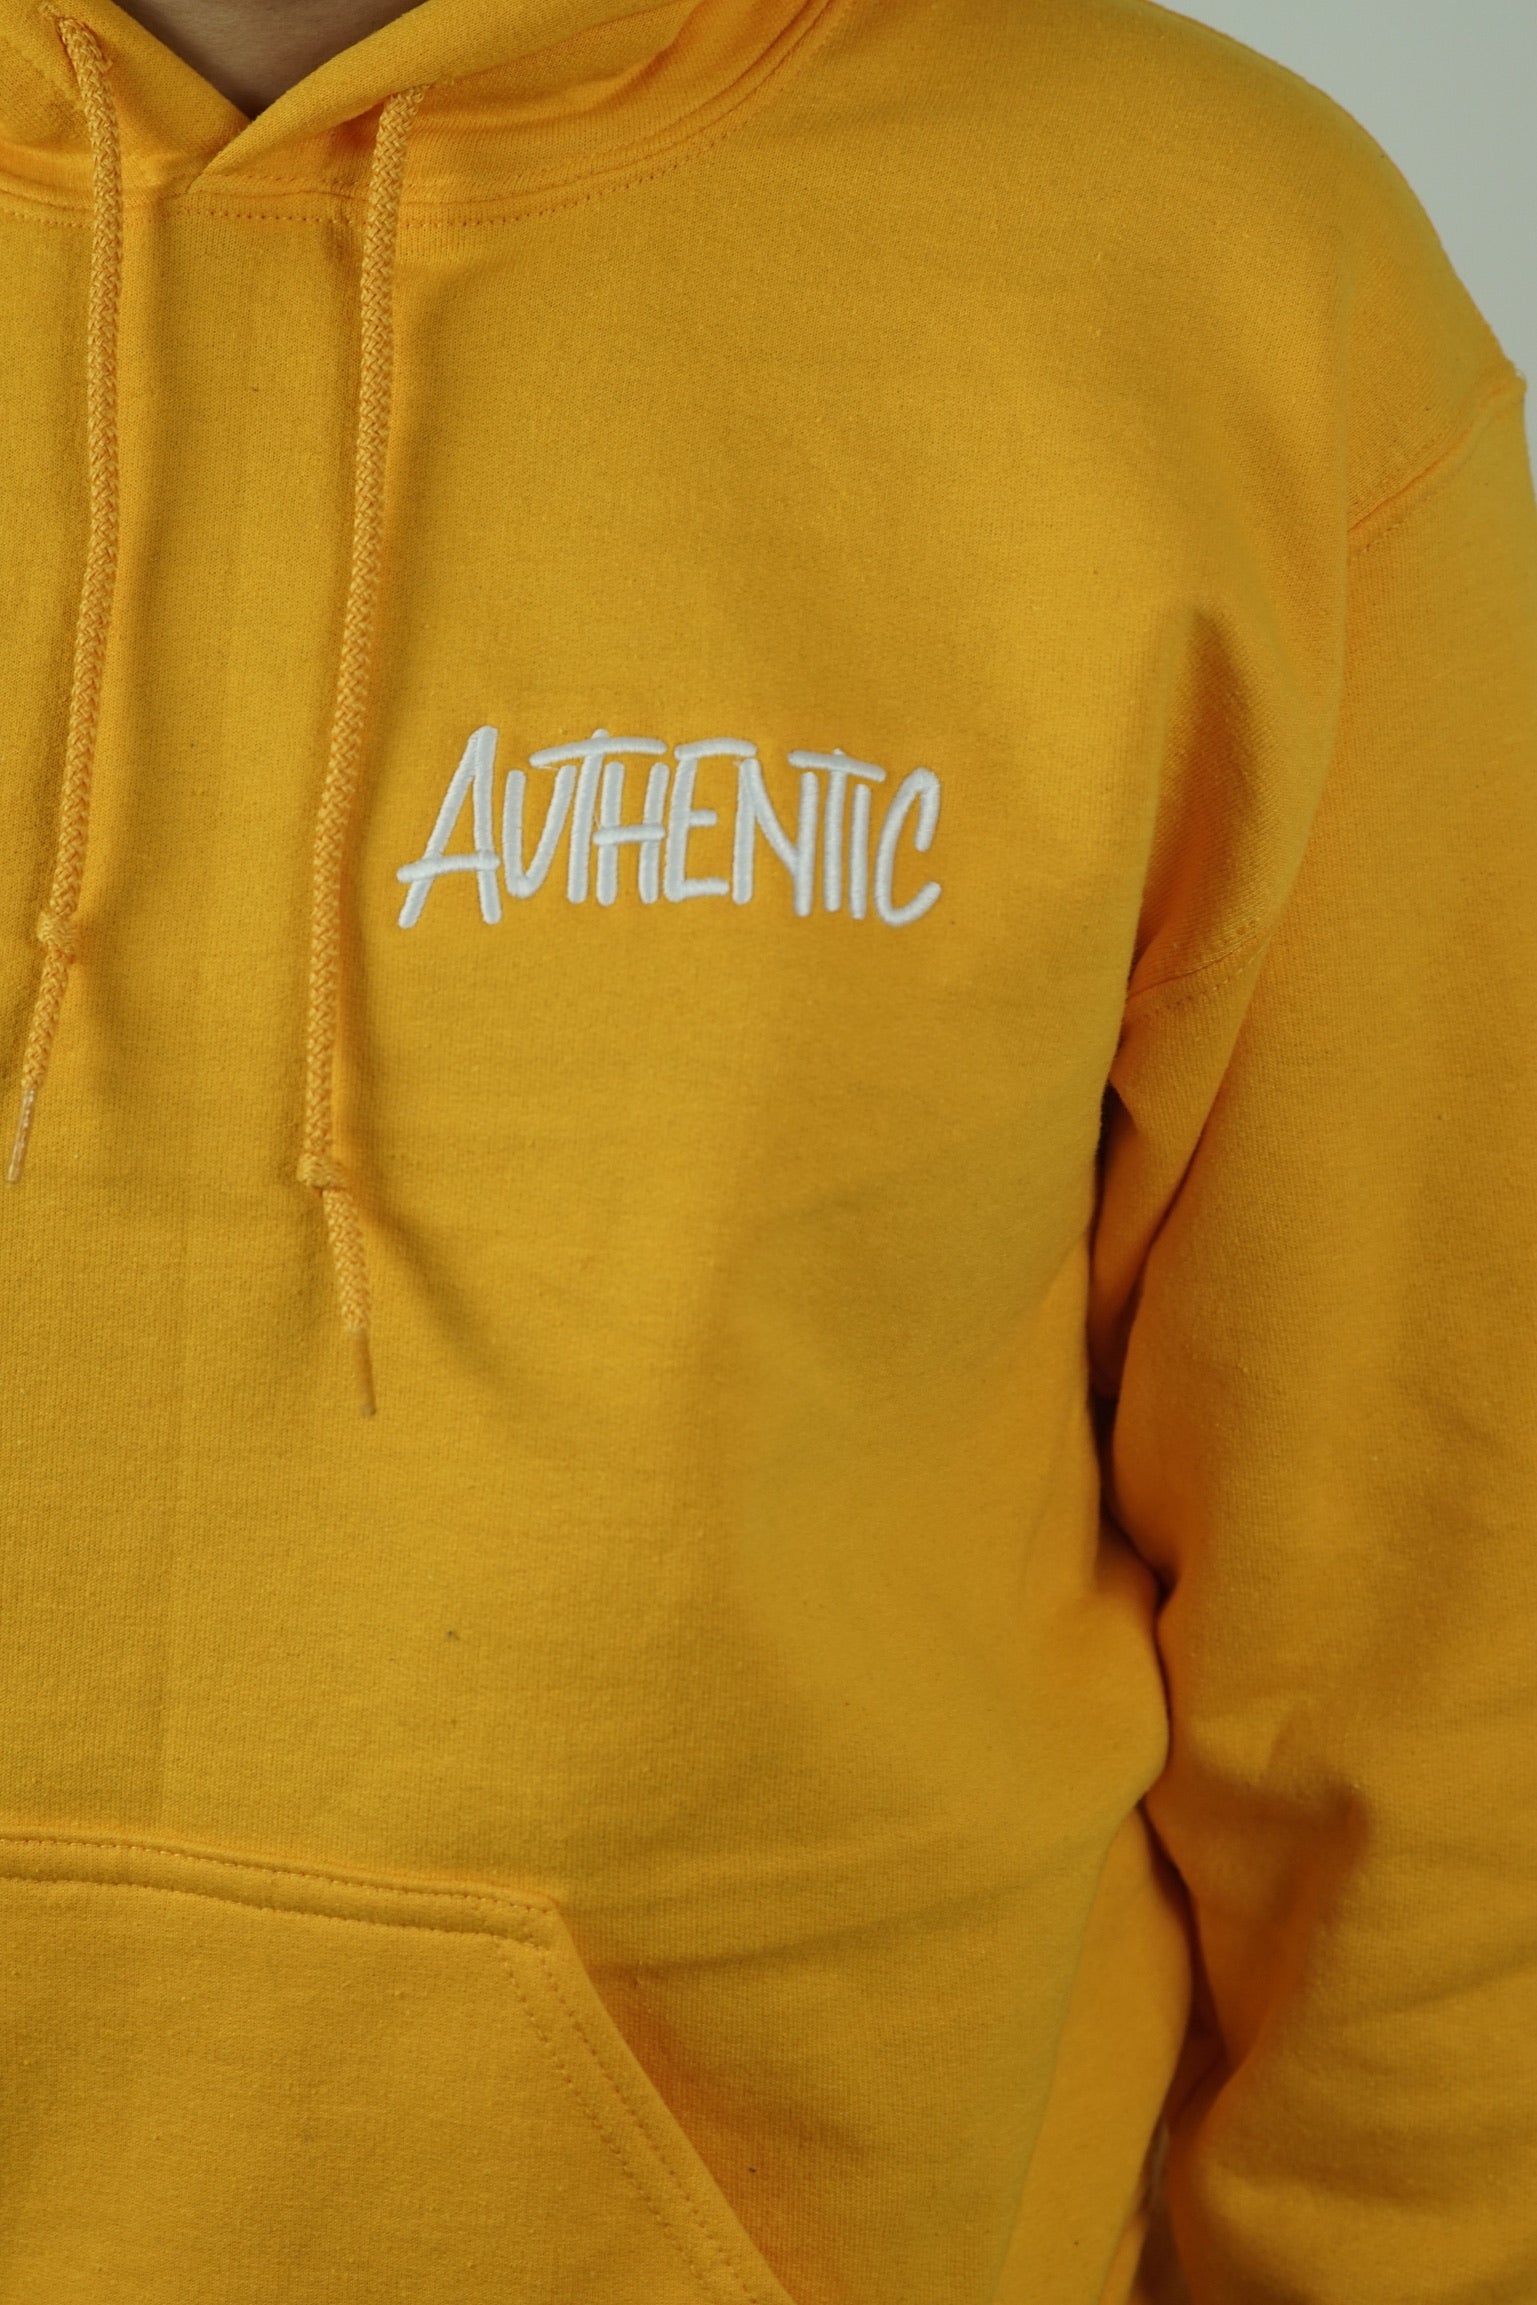 Yellow Embroidered Hoodie